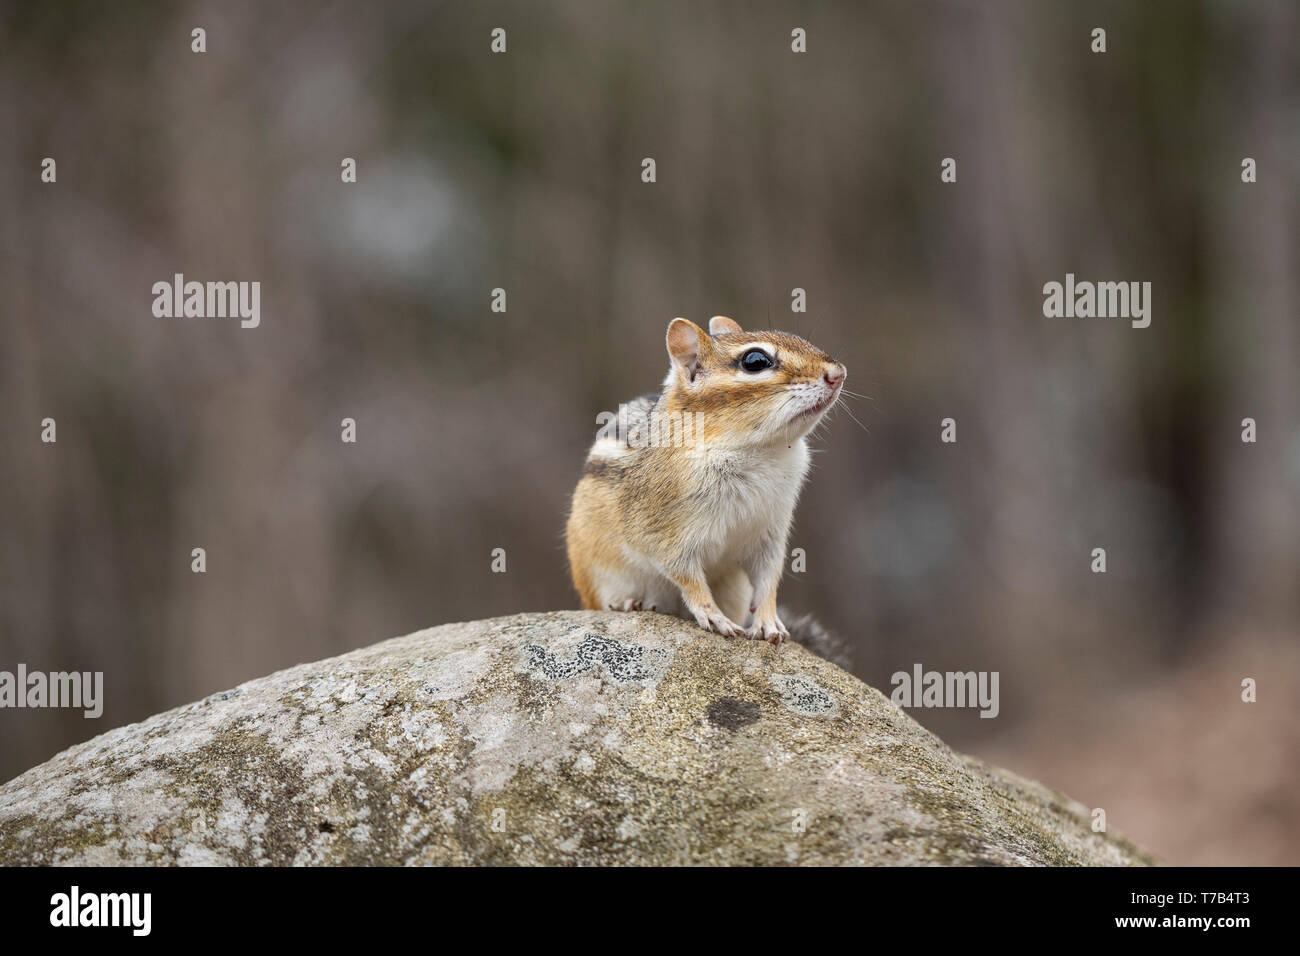 MAYNOOTH, ONTARIO, CANADA - April 30, 2019: A chipmunk (Tamias), part of the Sciuridae family forages for food.  ( Ryan Carter ) Stock Photo